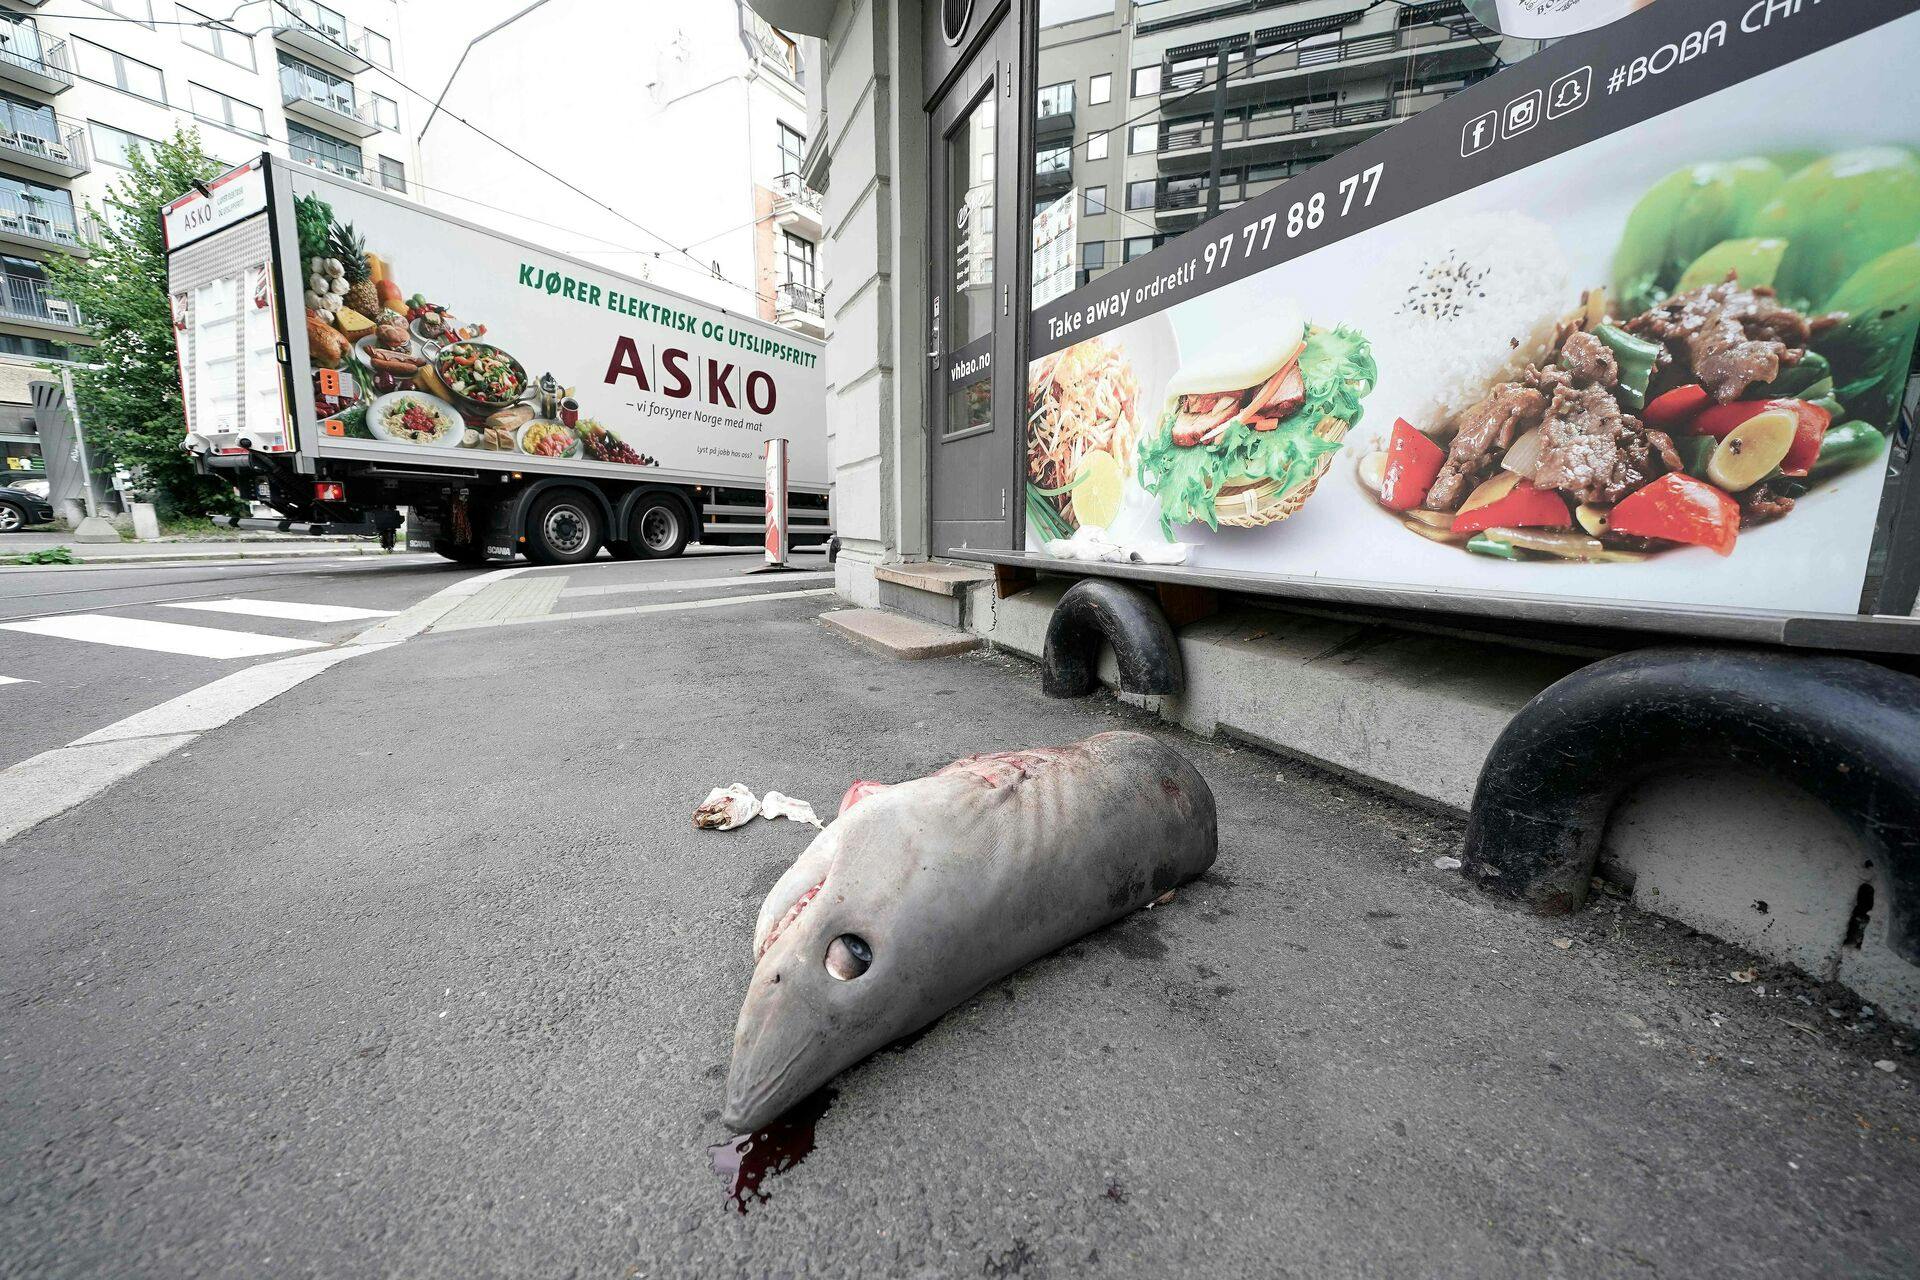 A shark's head lays on the street outside the sushi restaurant in Oslo, Norway on August 17, 2023, where it was dropped by accident after it was sold from a grocery store in the area according to local reports. (Photo by Stian Lysberg Solum / NTB / AFP) / Norway OUT